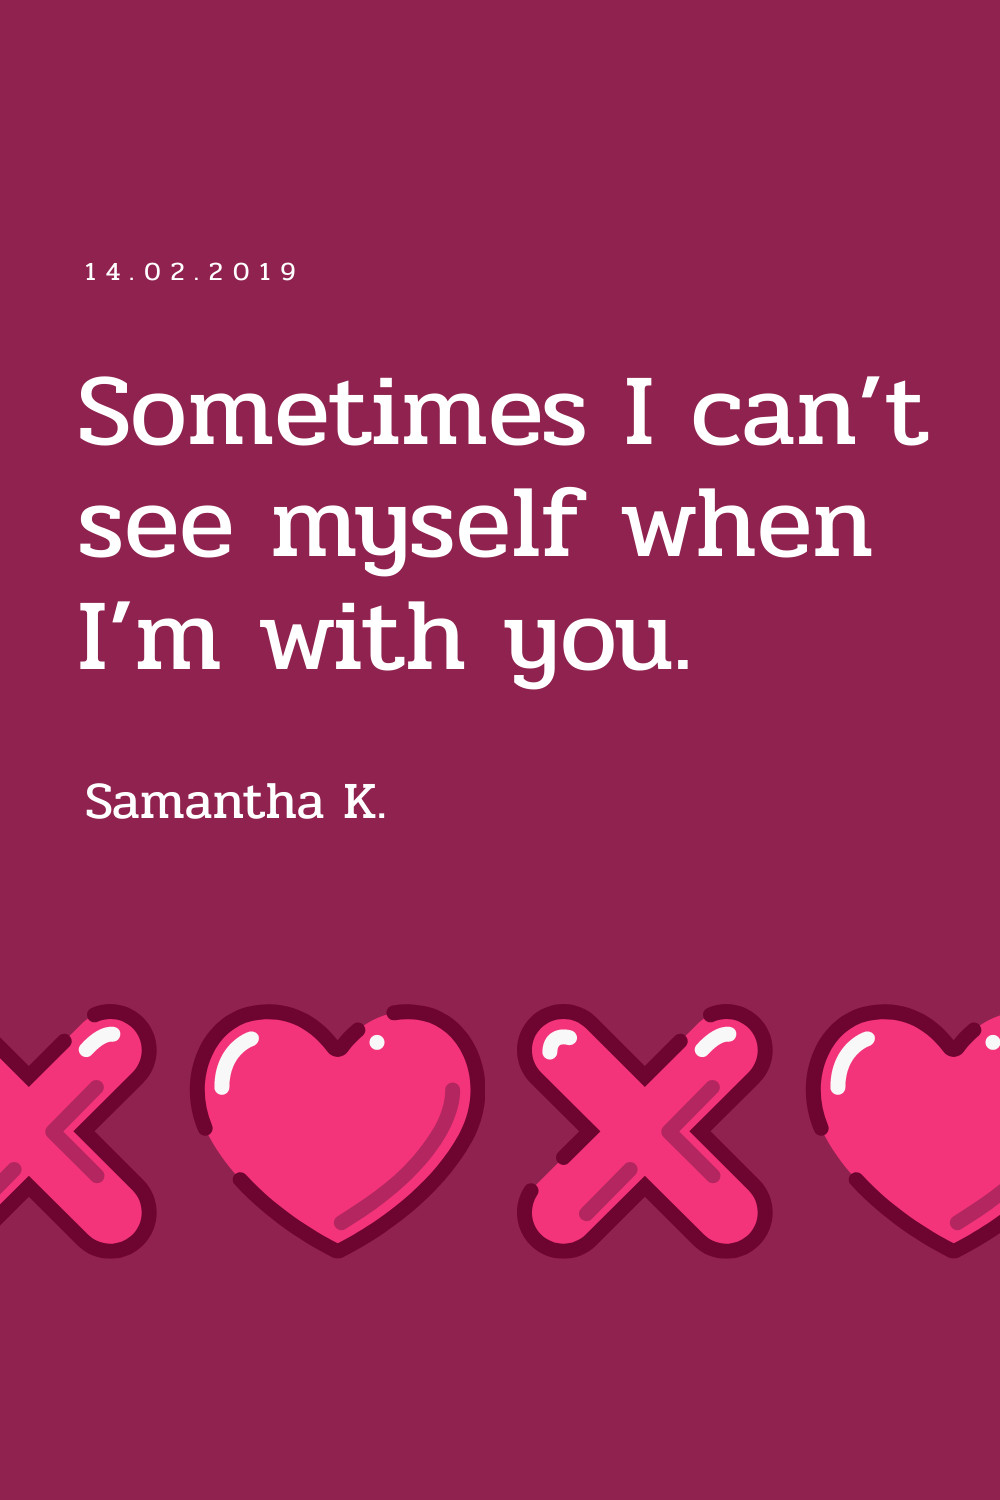 Valentine's Day I See Xoxo Facebook Cover 820x360